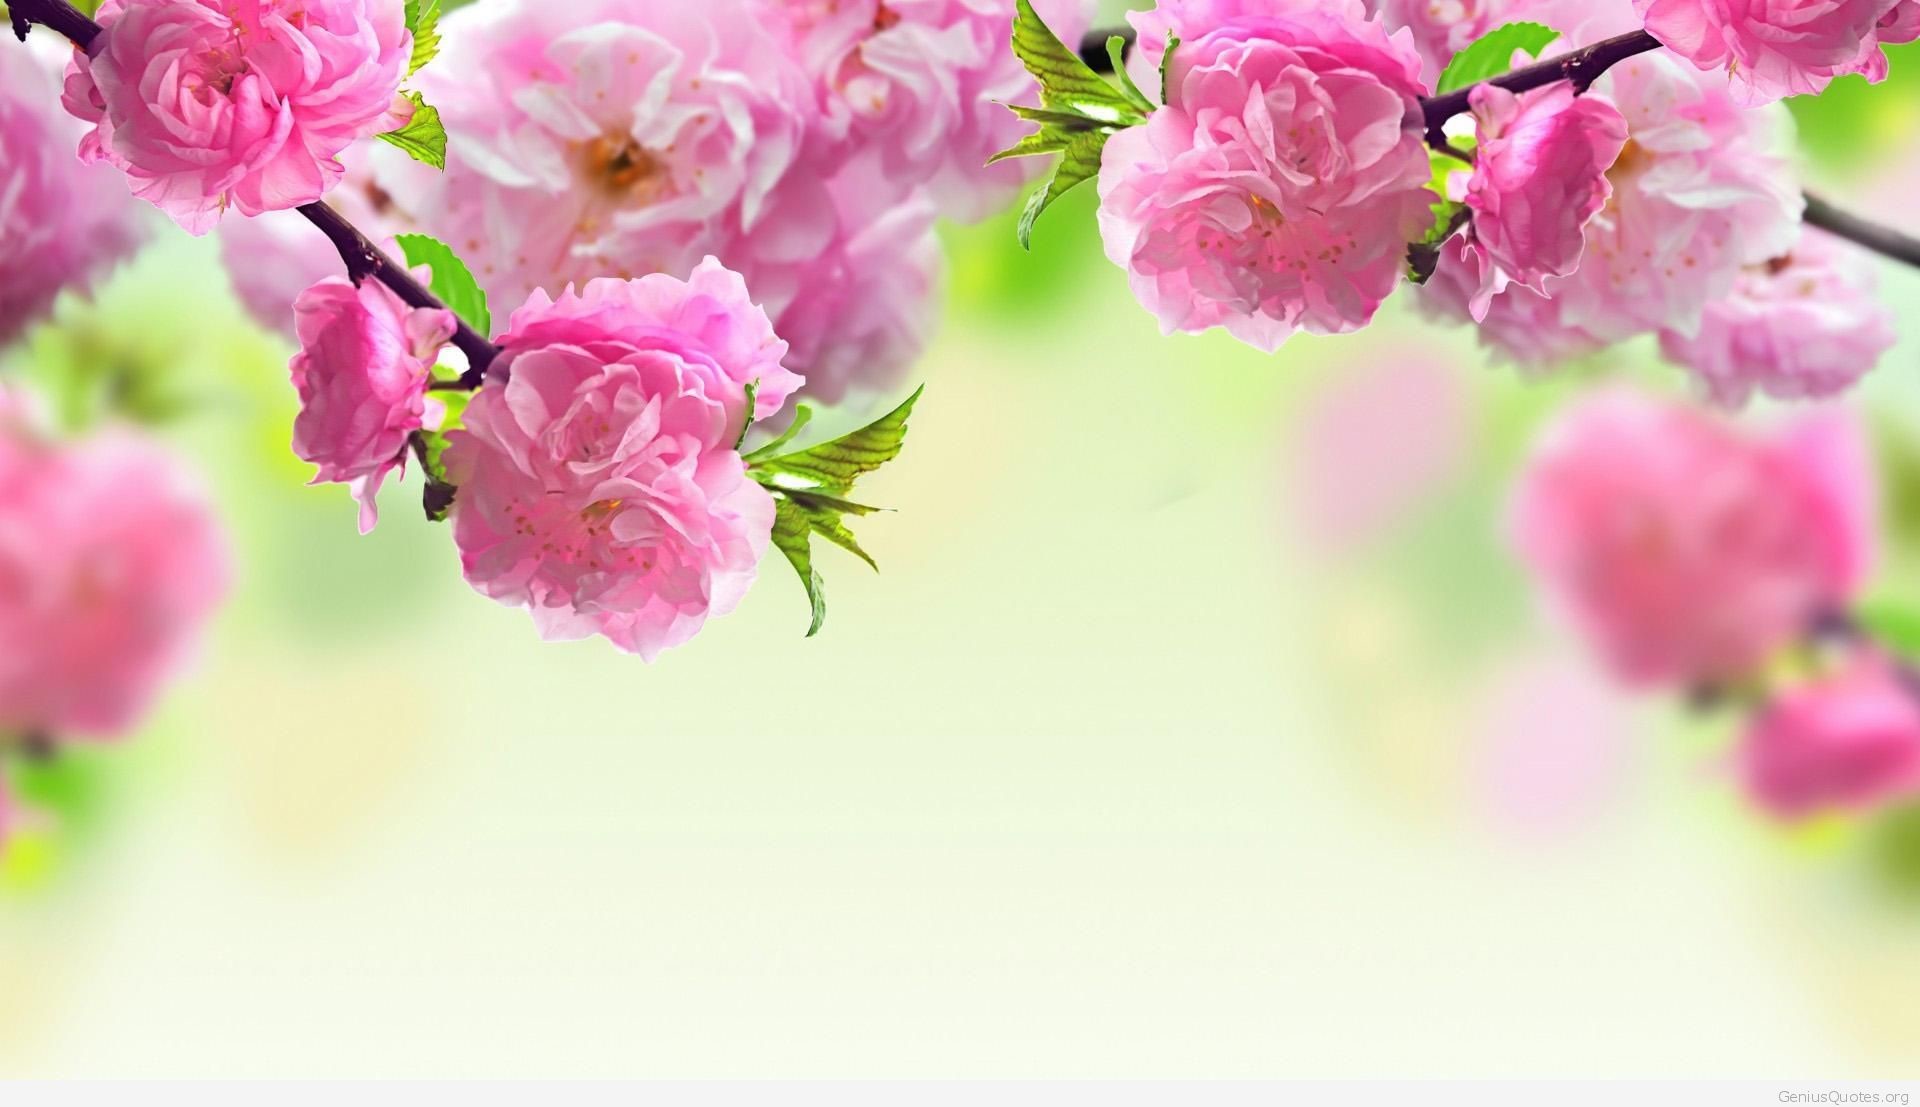 1920x1107 High Resolution Pink Roses Wallpapers Photos for PC & Mac, Tablet, Laptop,  Mobile